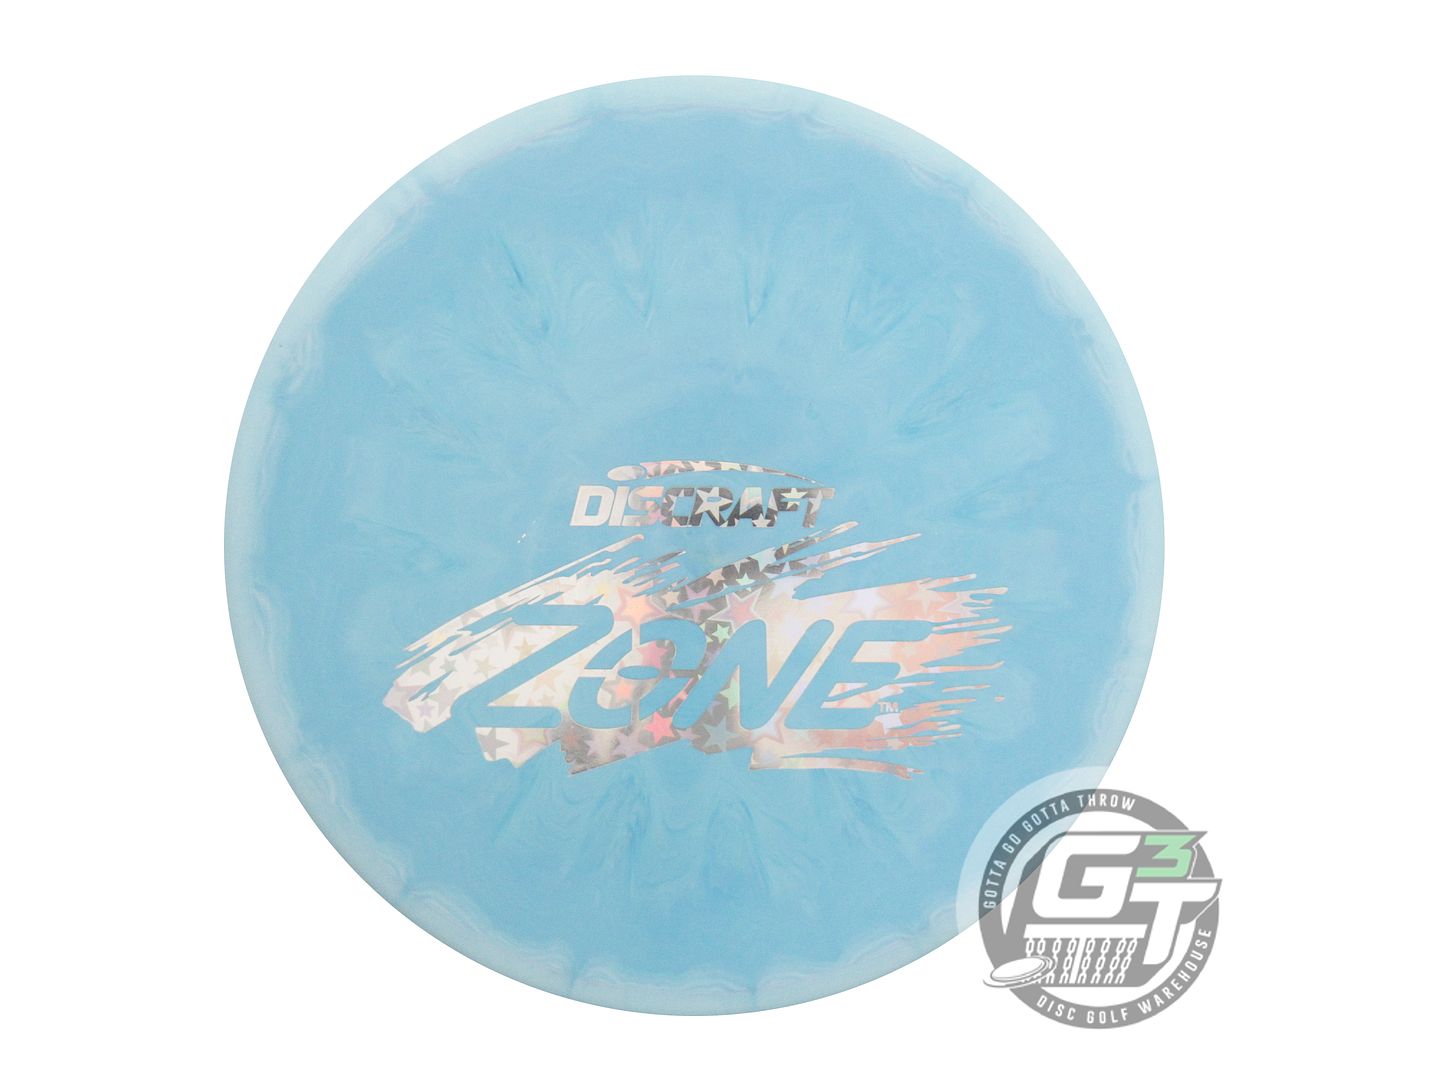 Discraft Limited Edition Old School Pro D Stamp ESP Zone Putter Golf Disc (Individually Listed)